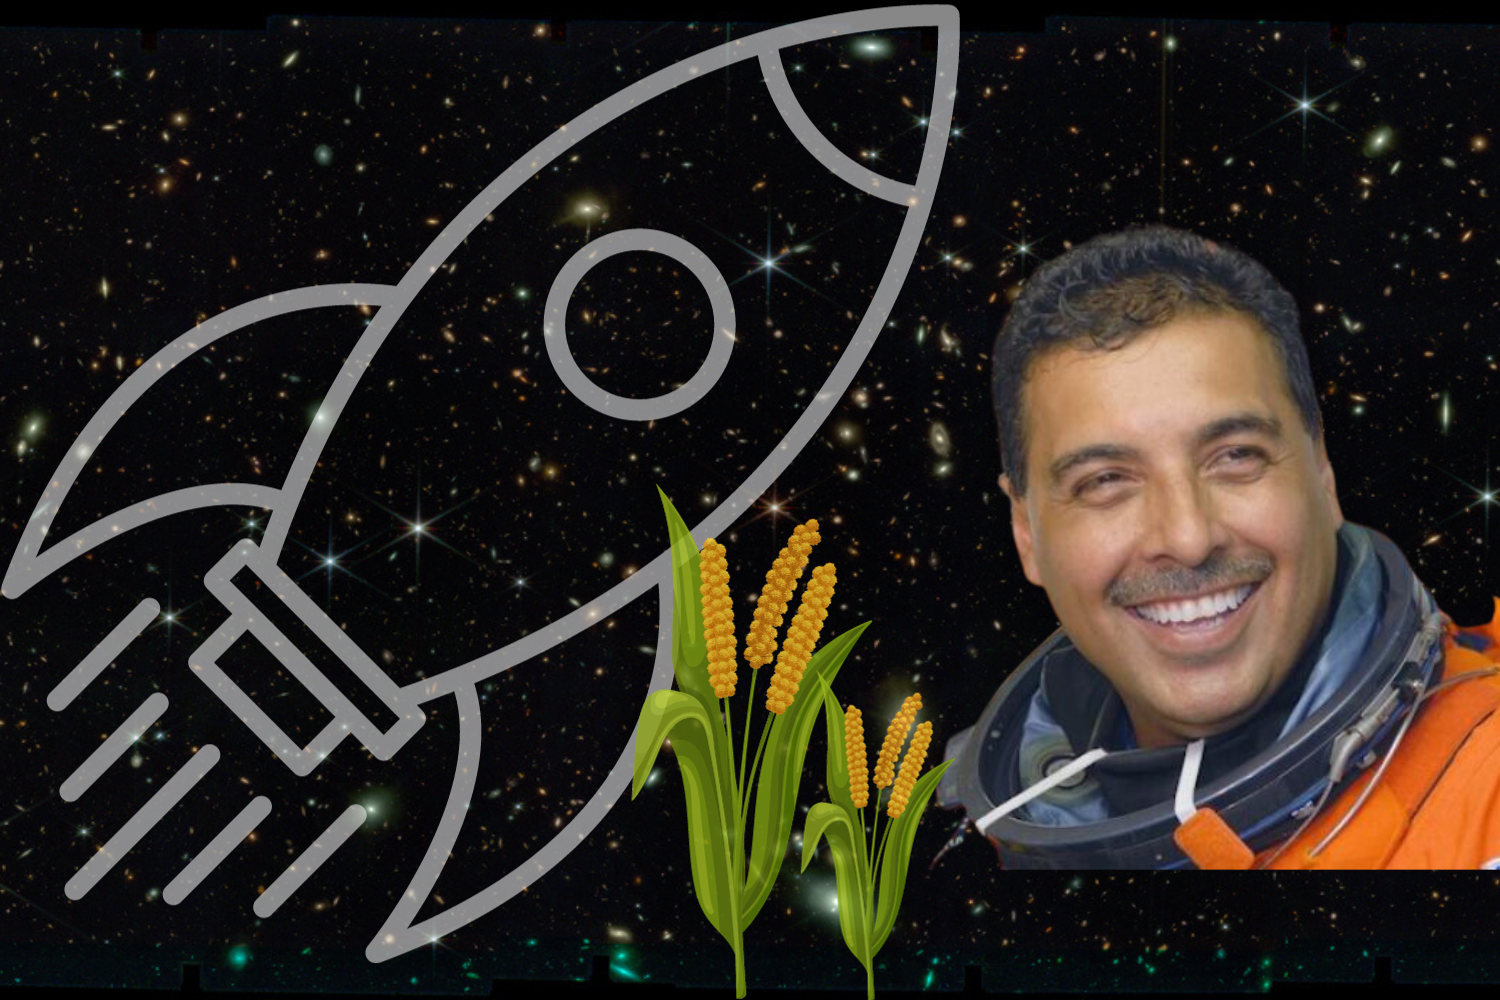 José Hernandez grew up a migrant farmworker in the fields of California, and he later became an engineer and astronaut.